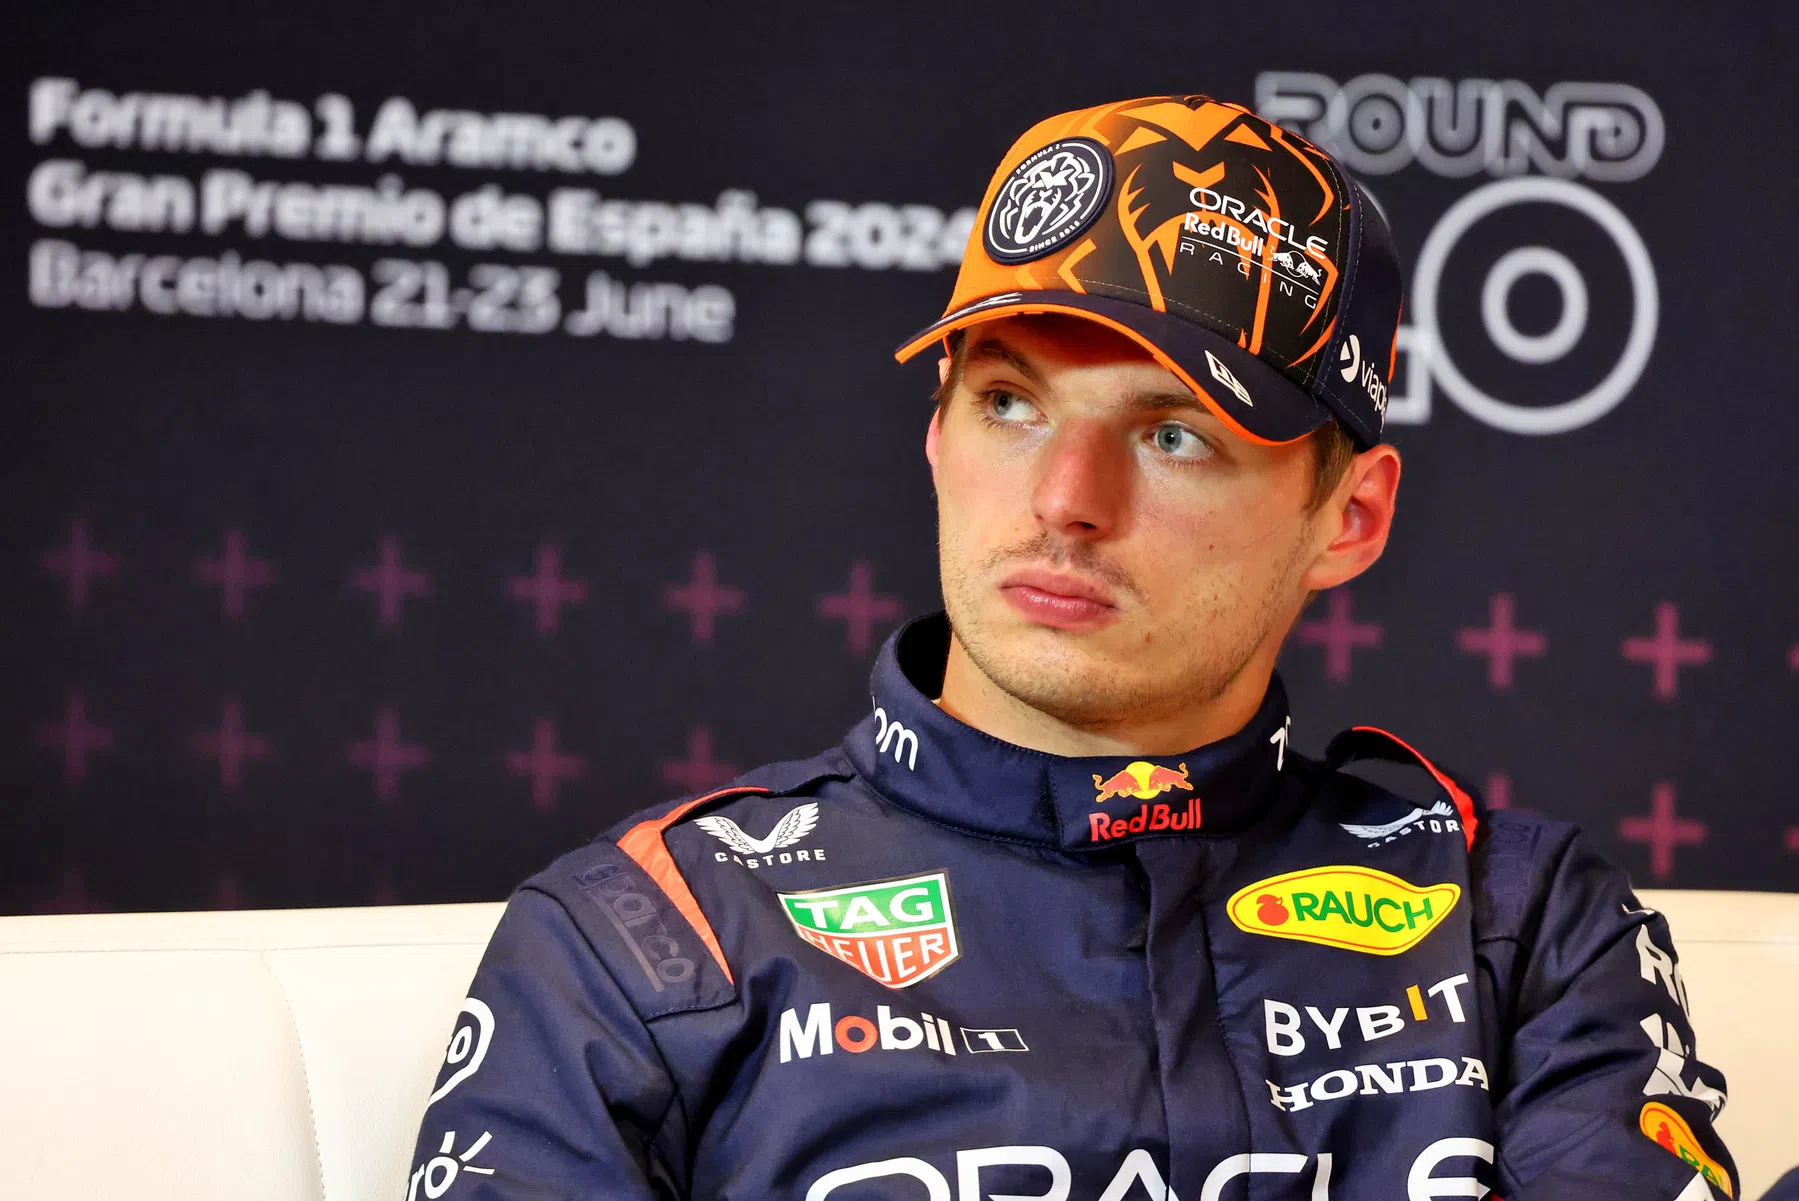 Verstappen had been letting his concerns about Red Bull be known for months